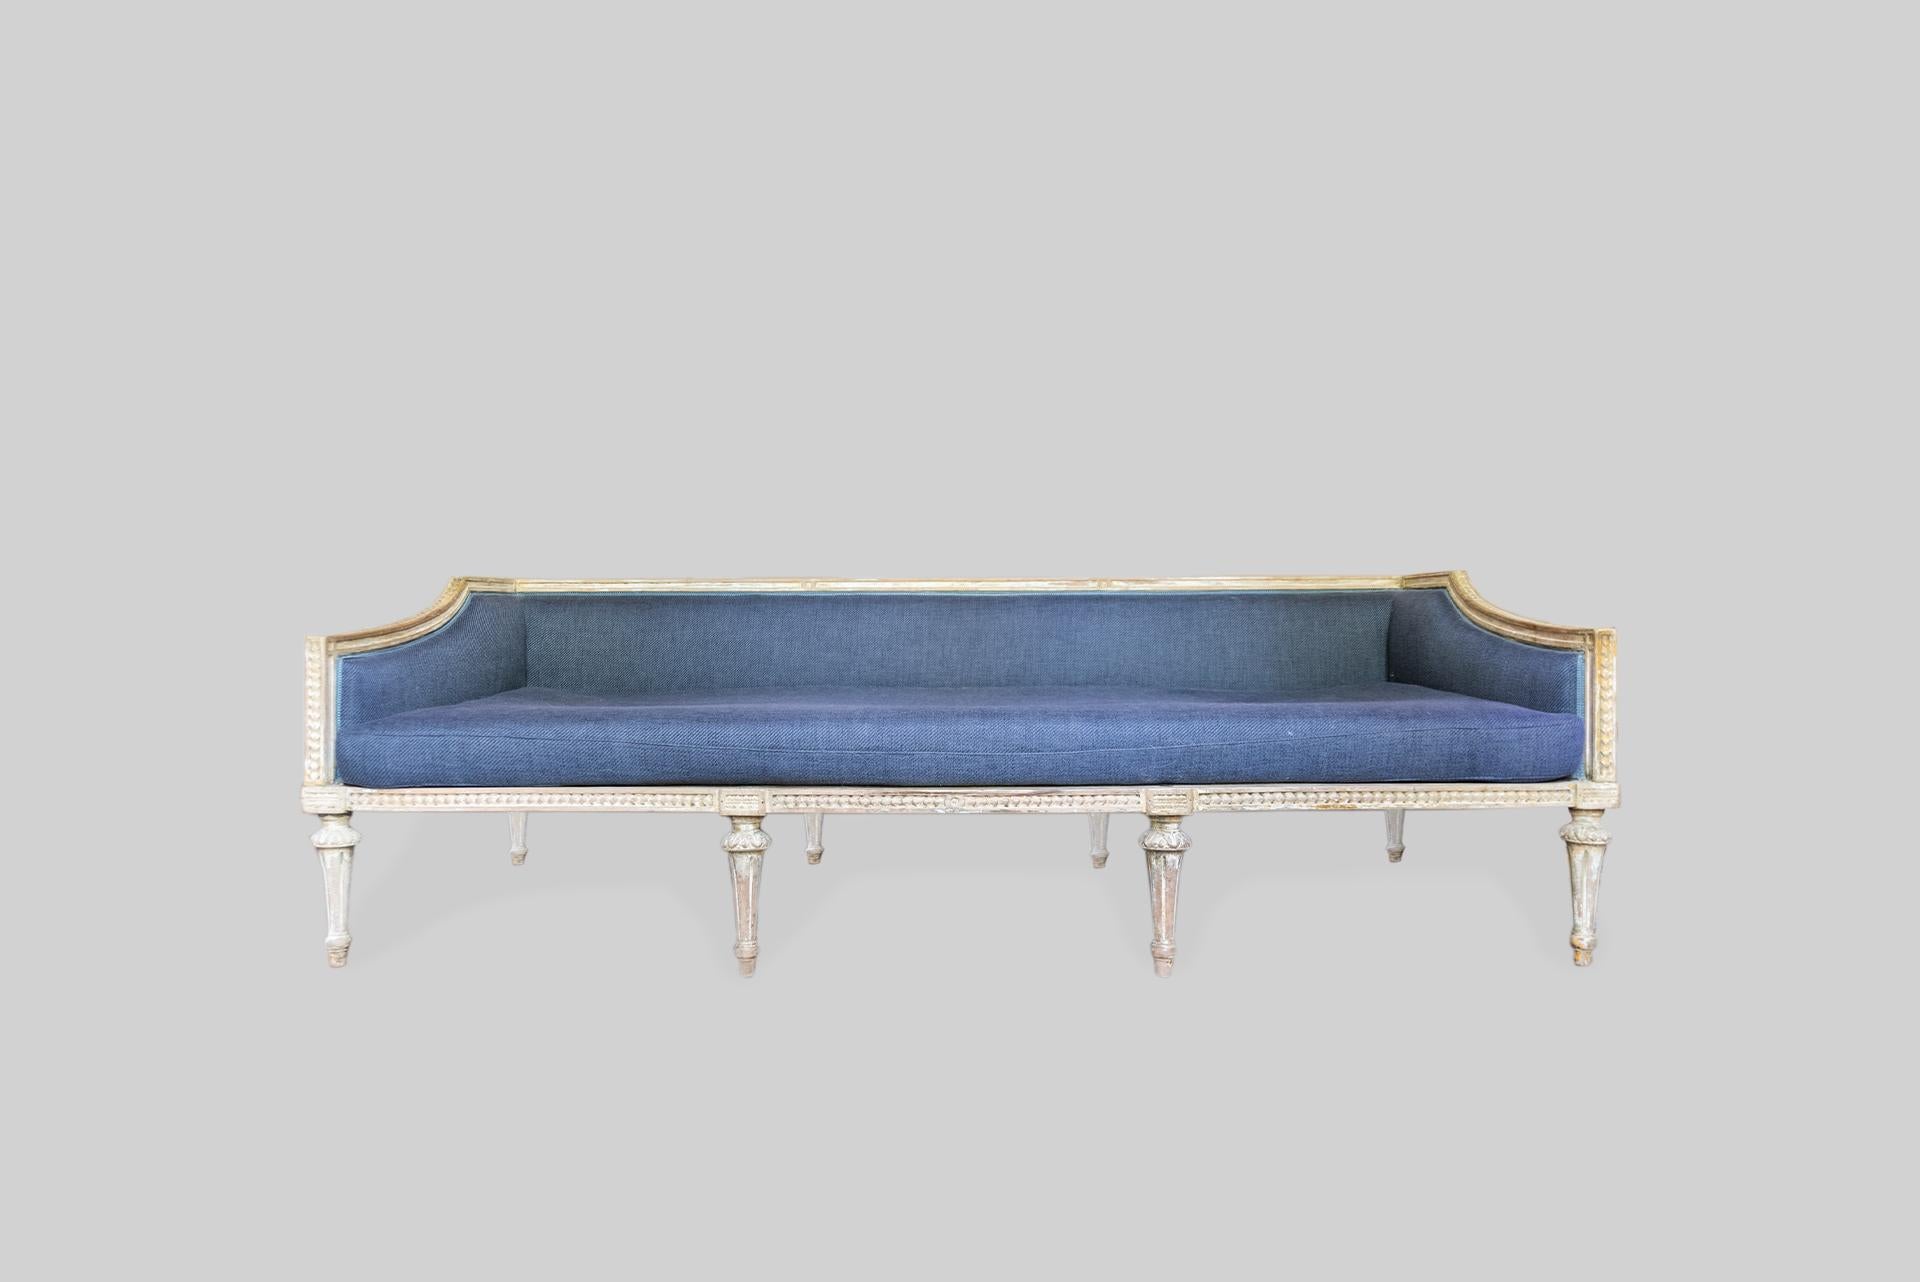  GUSTAVIAN SETTEE SOFA 19th Century In Good Condition For Sale In Barcelona, ES